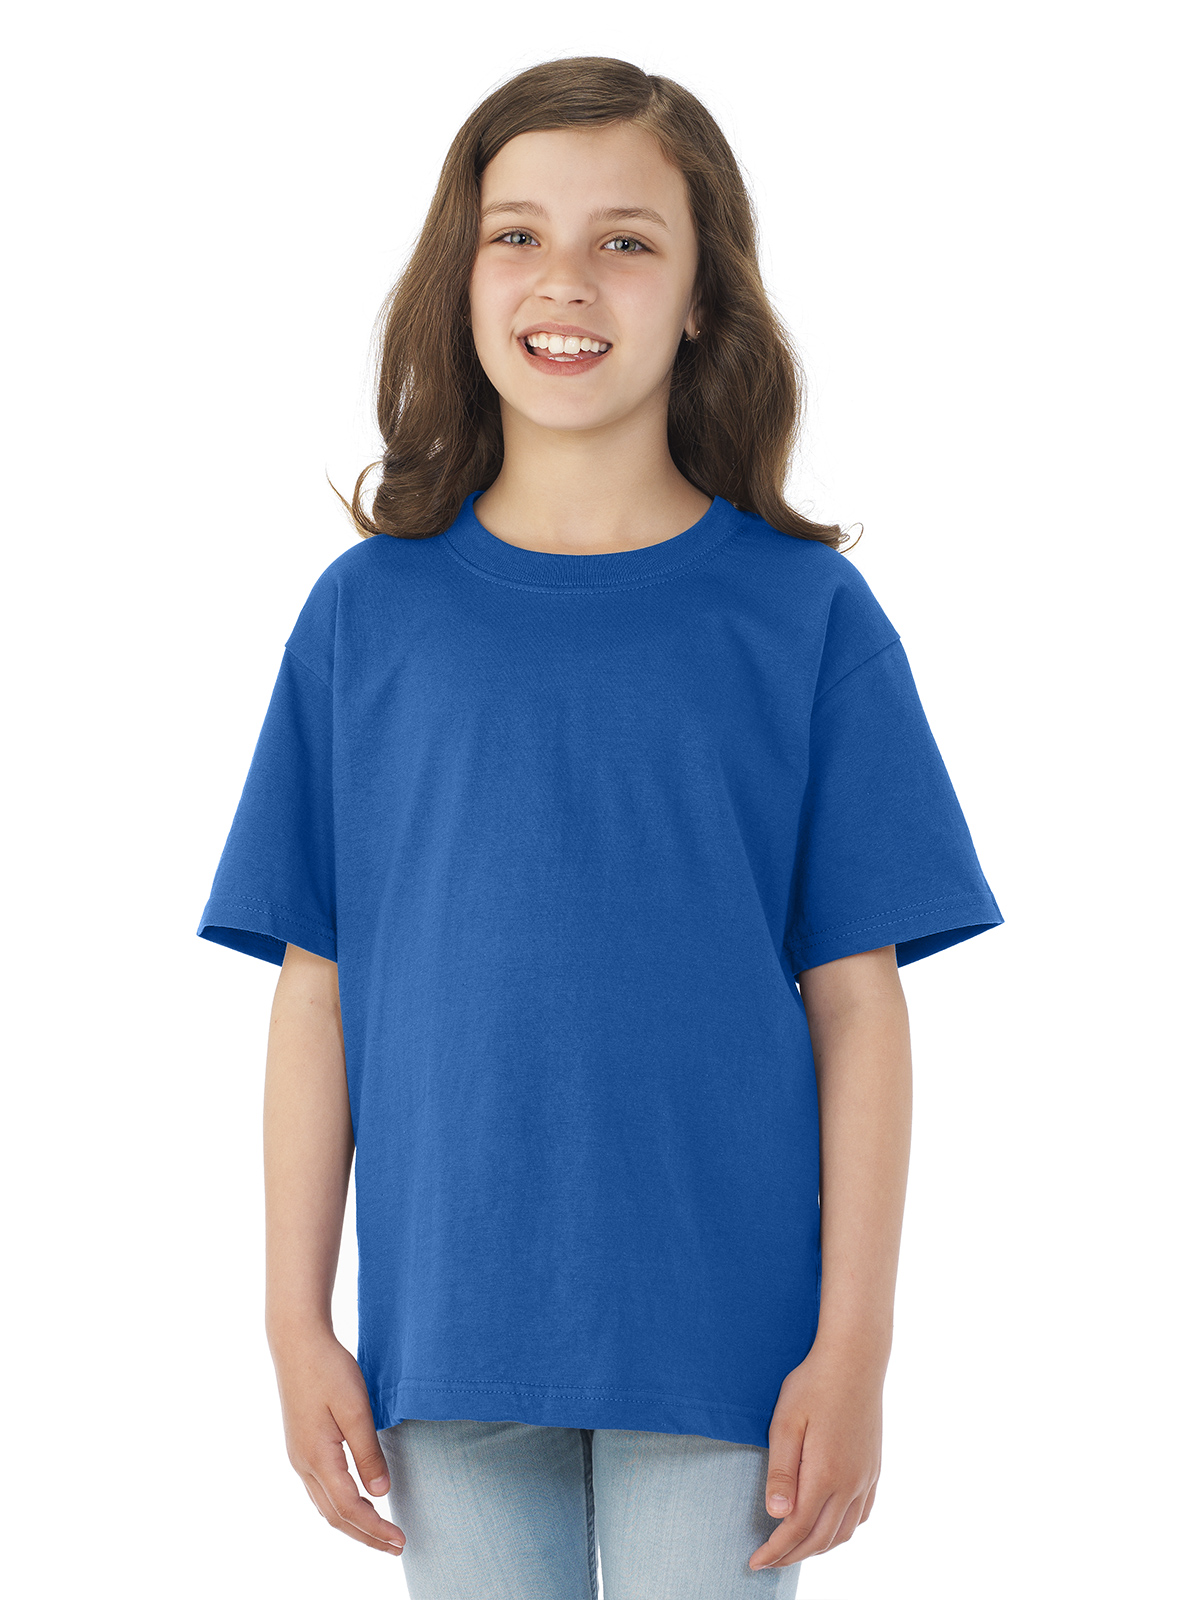 363BR Toddlers short sleeve tee T shirts SALE JERZEES Youth HiDENSI-T™ T-Shirt 